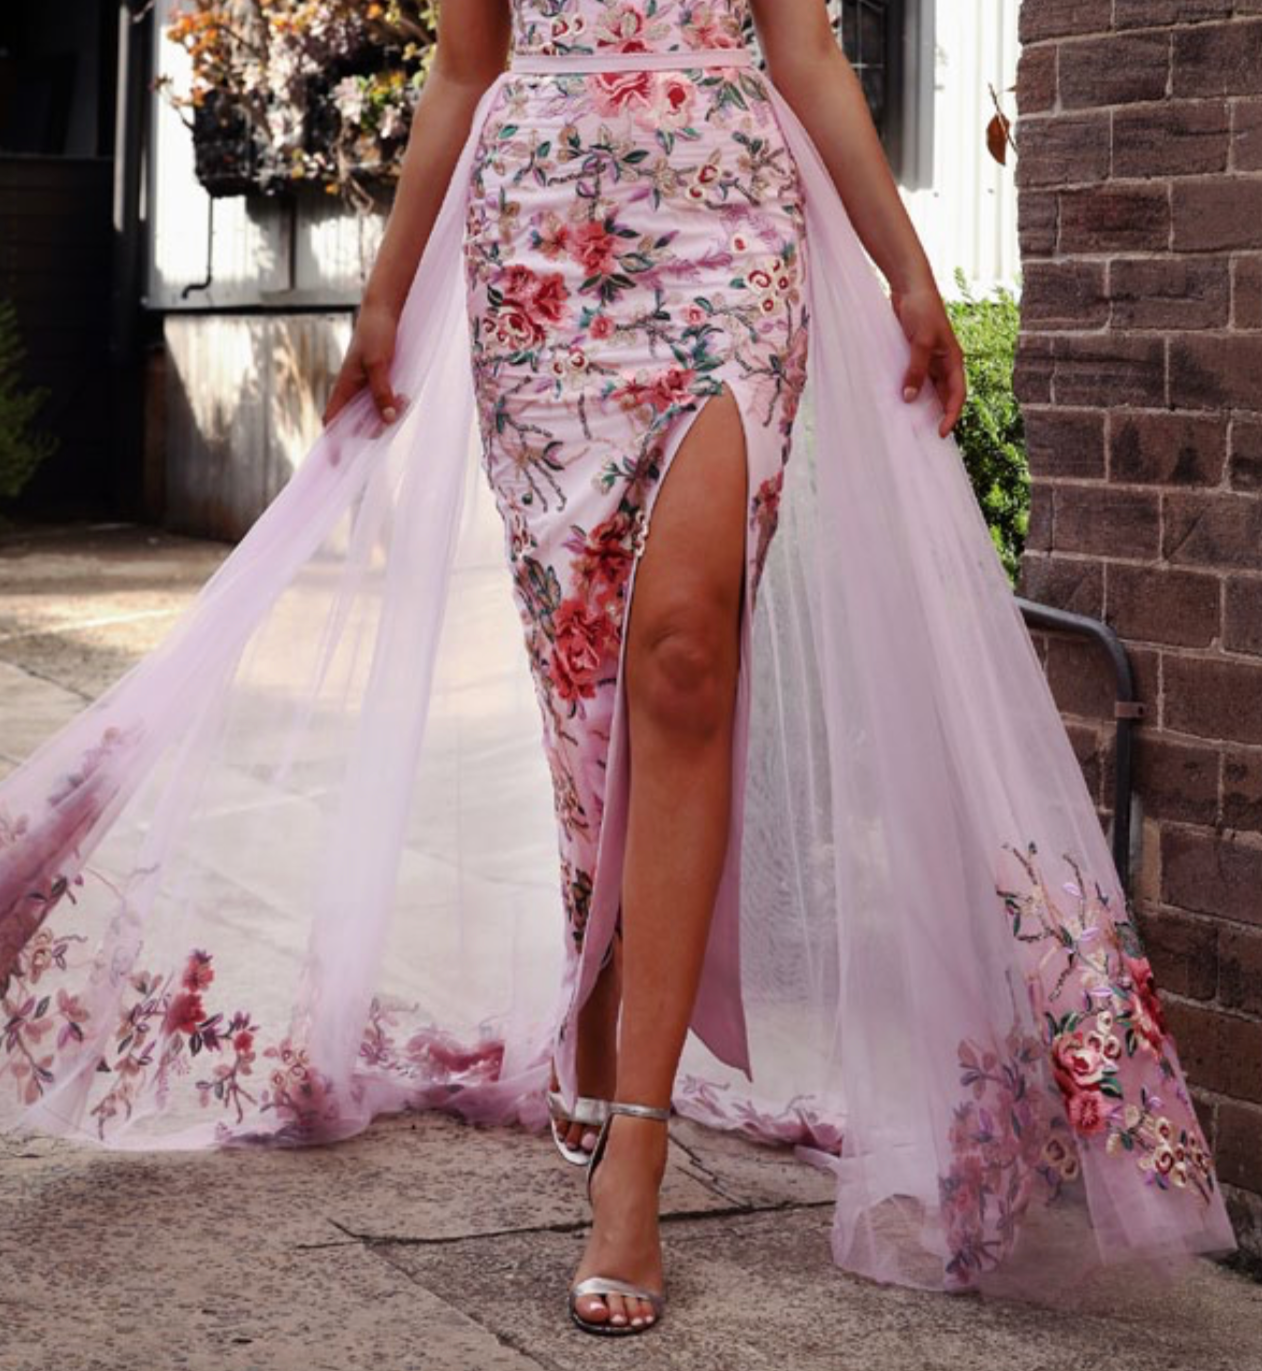 Ball gown wedding dress with floral lace skirt and atlas top